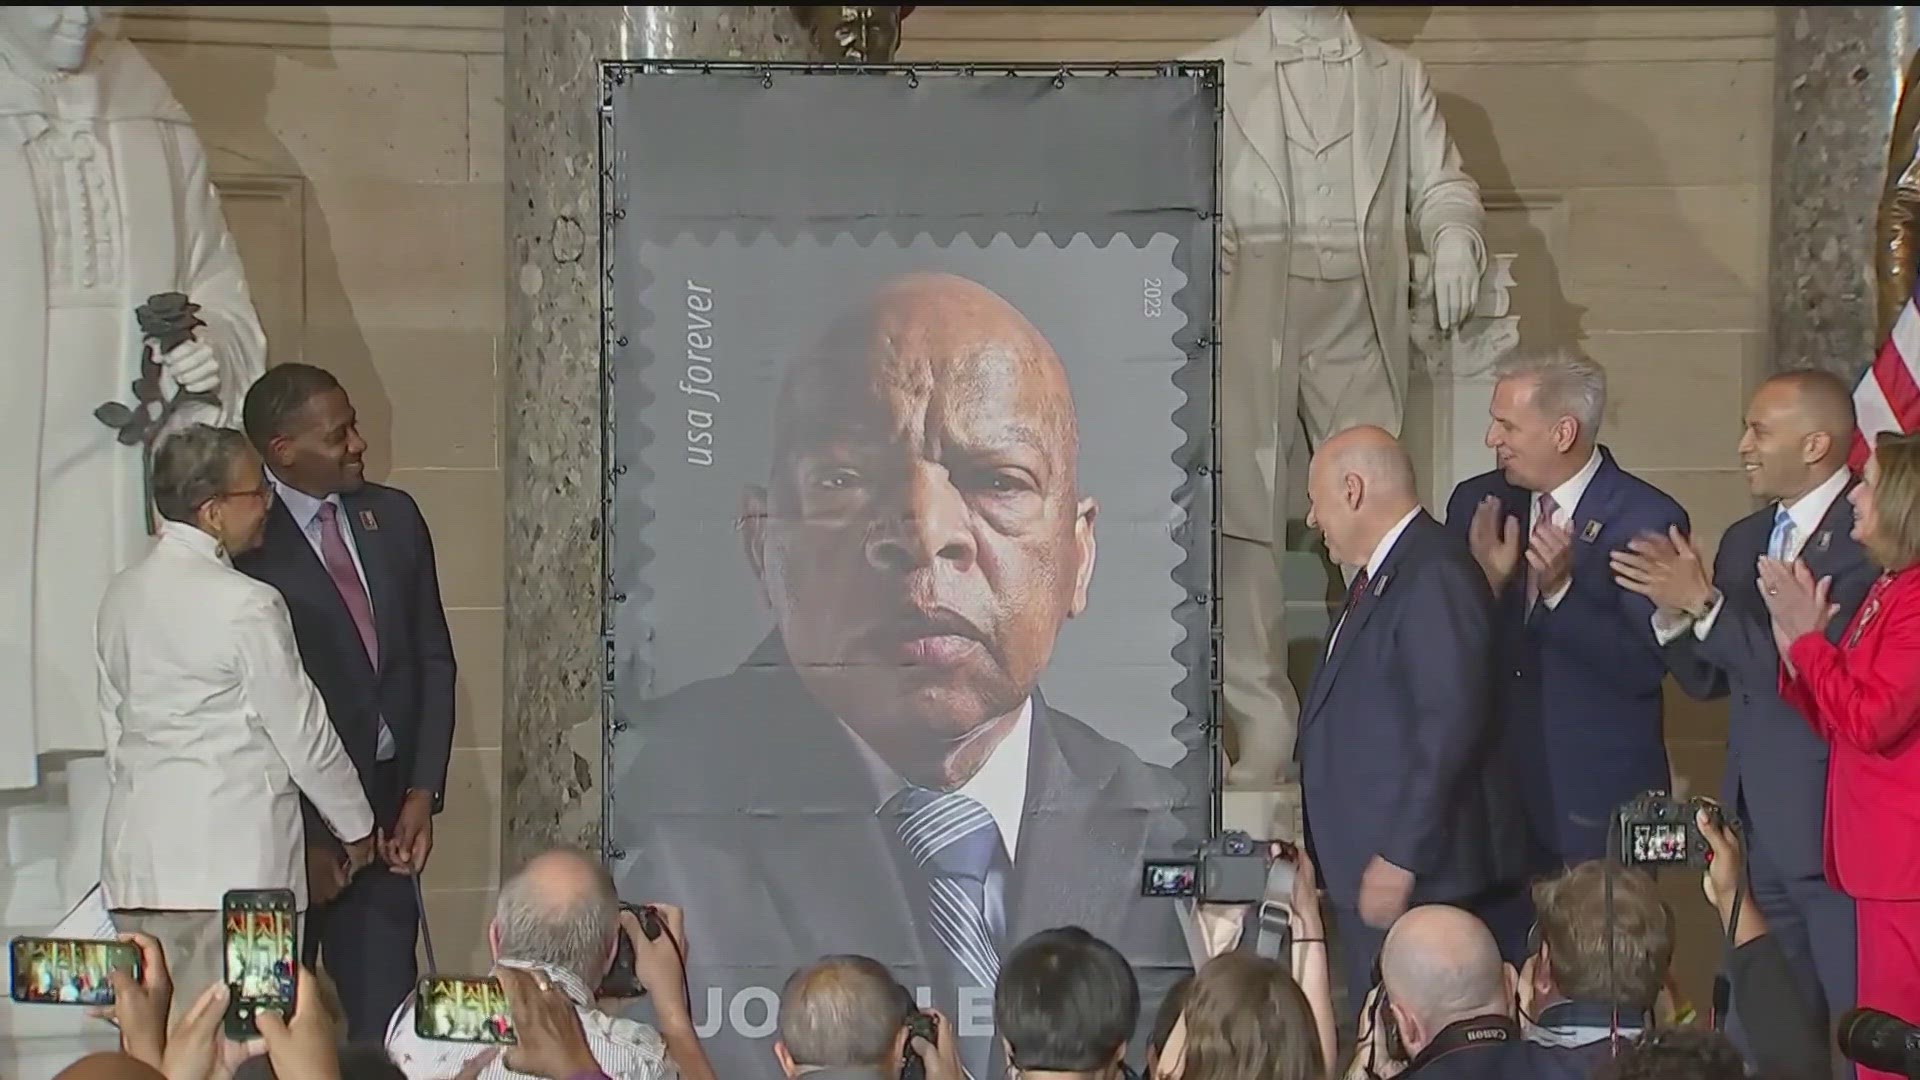 The Civil Rights icon will be memorialized forever.